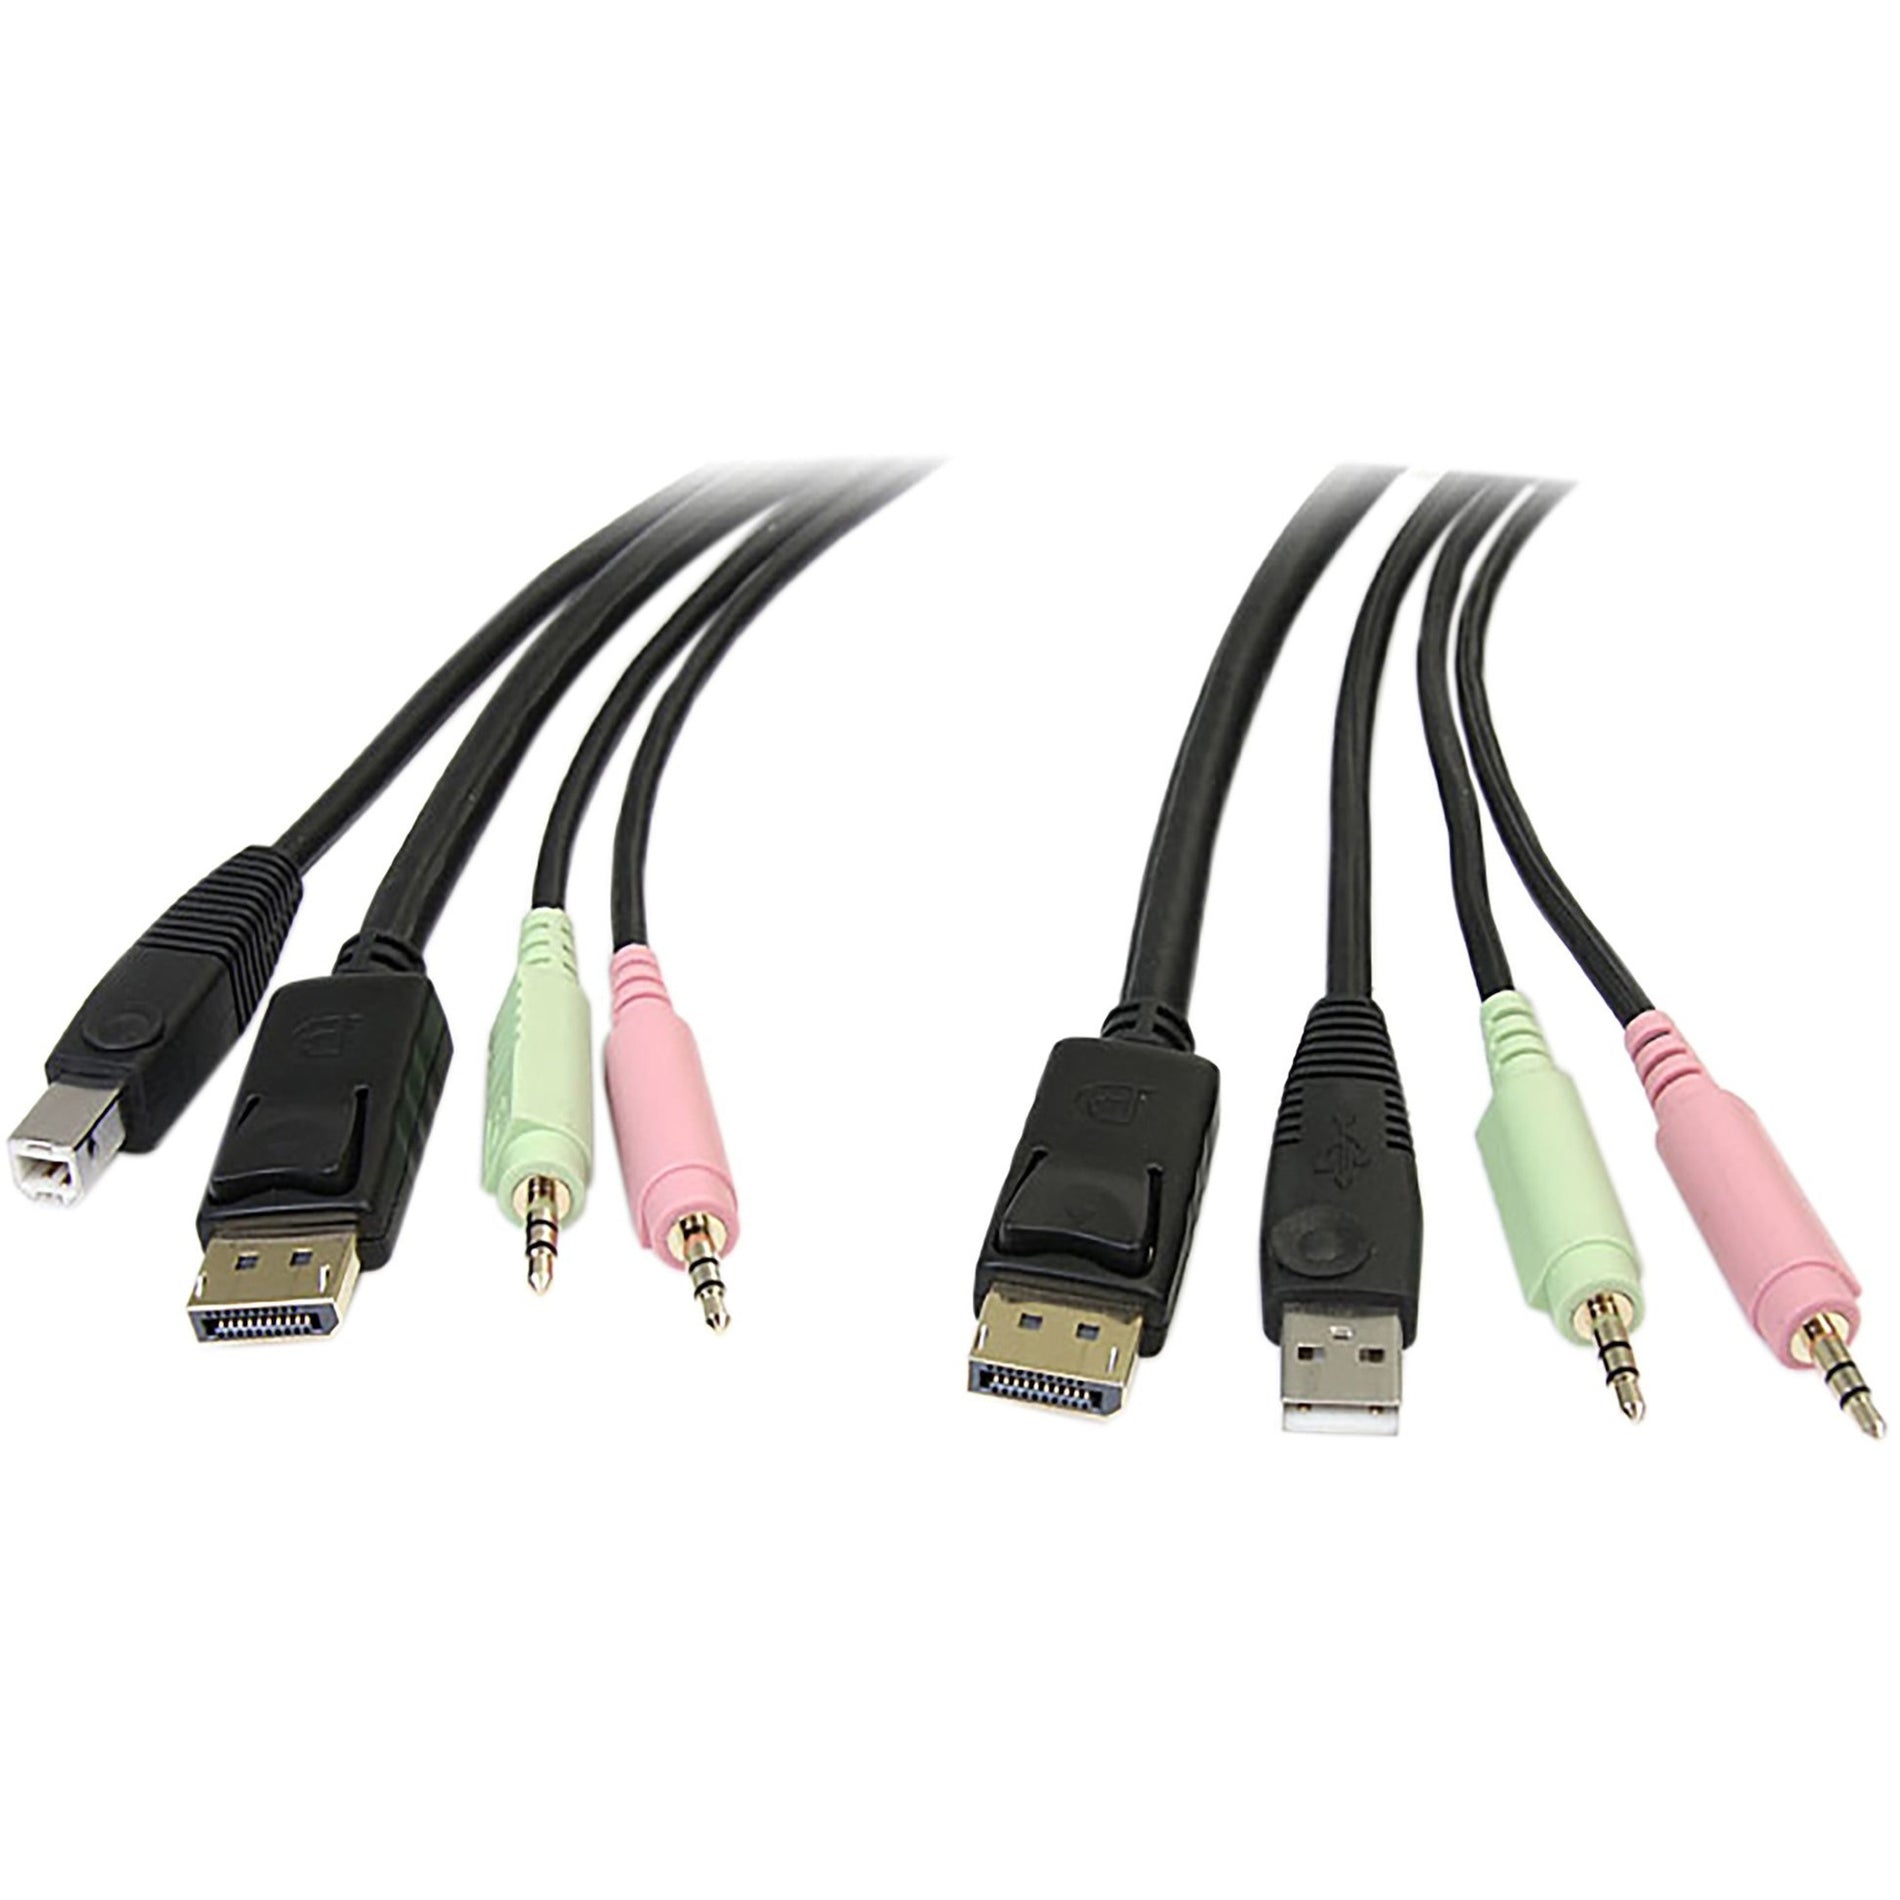 StarTech.com DP4N1USB6 6 ft 4-in-1 USB DisplayPort KVM Switch Cable Molded Strain Relief Gold Plated Connectors スター テック ドット コム DP4N1USB6 6 フィート 4-in-1 USB ディスプレイポート KVM スイッチ ケーブル、成形、ストレイン リリーフ、金メッキコネクタ